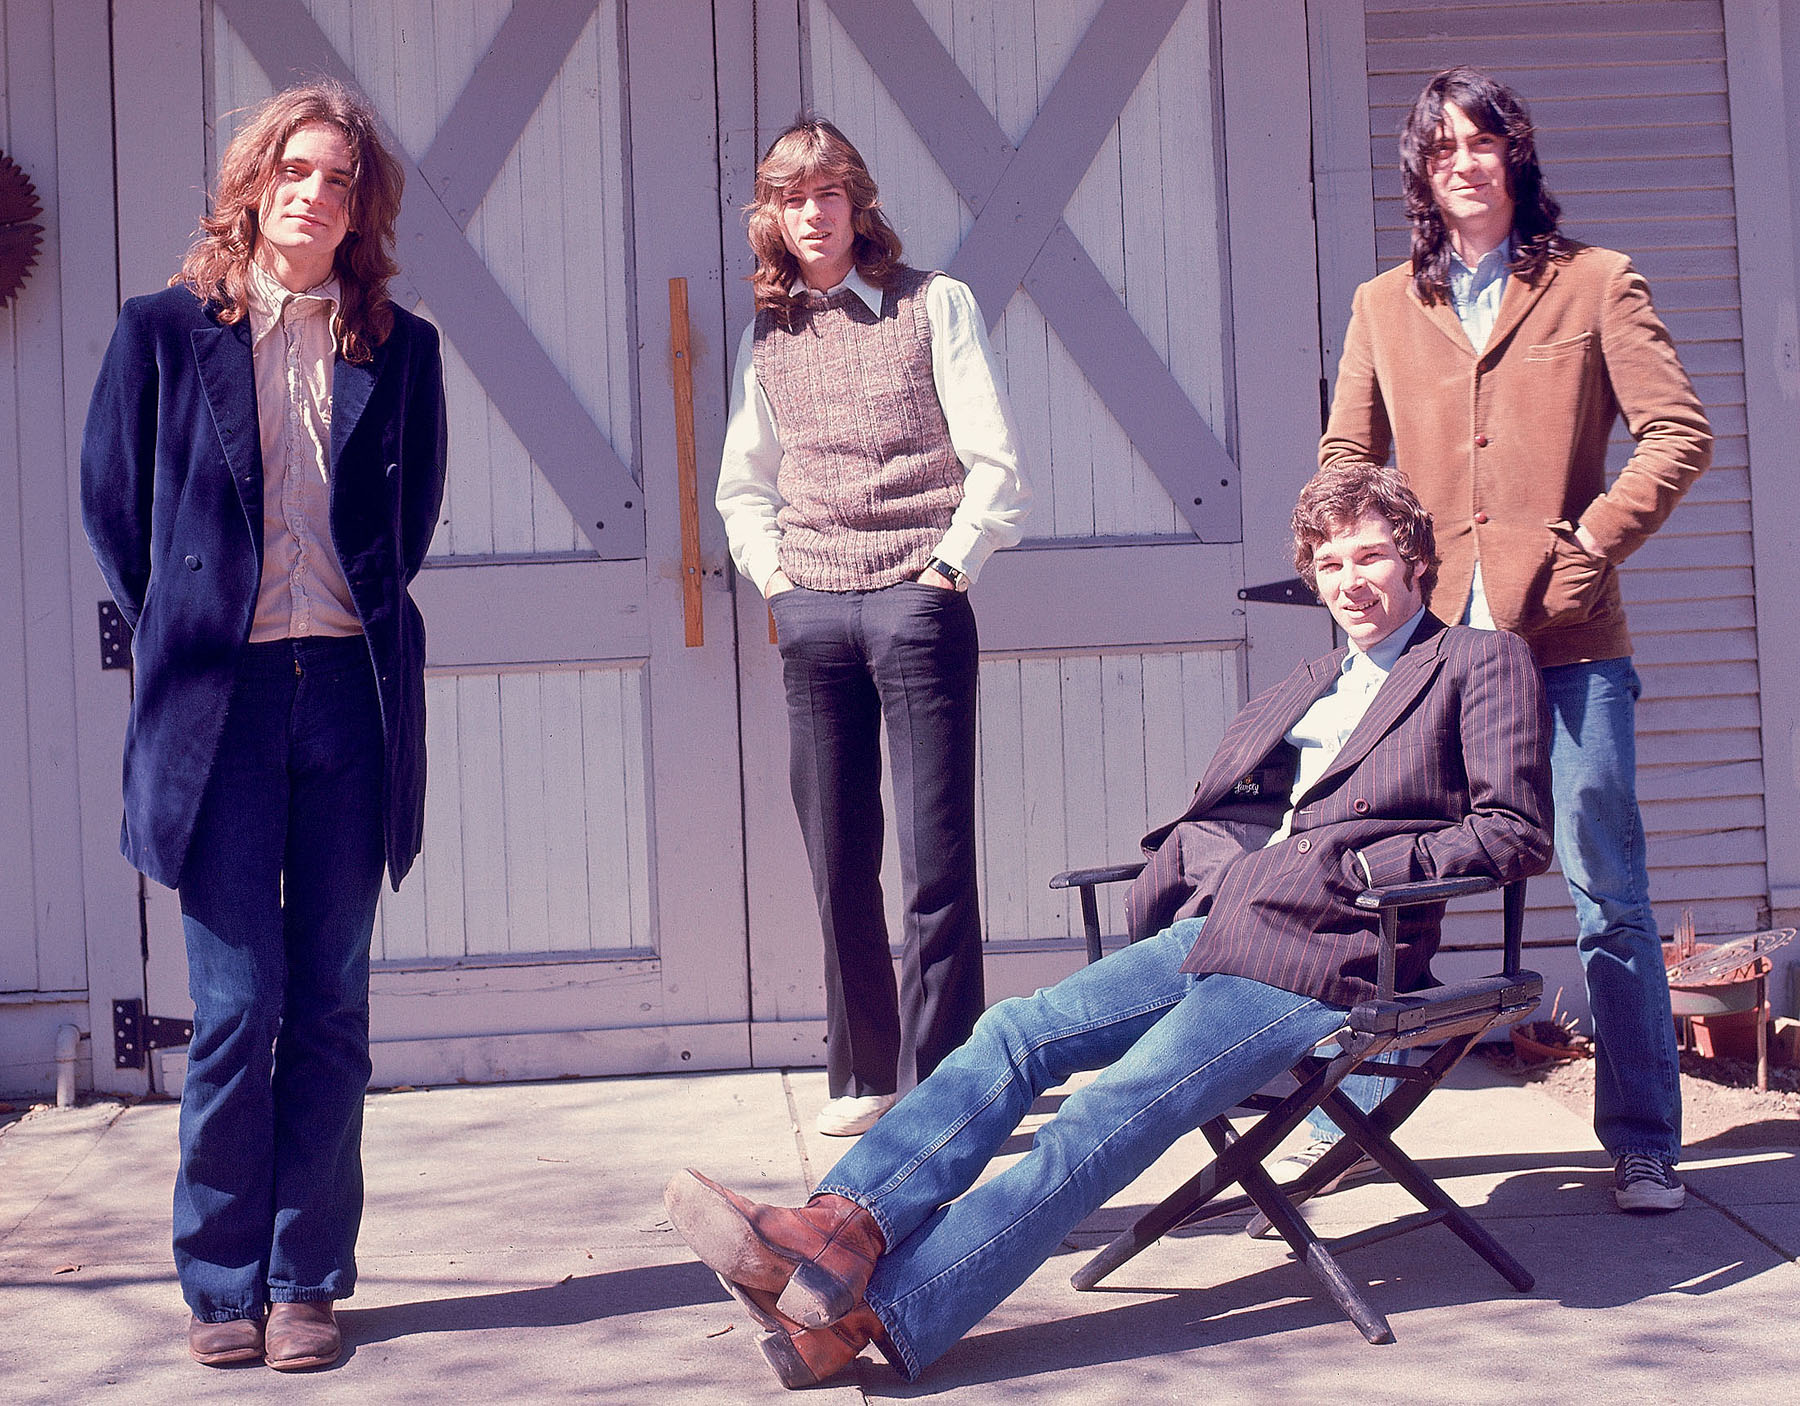 Alex Chilton, Jody Stephens, Chris Bell and Andy Hummel pose together smiling at the camera